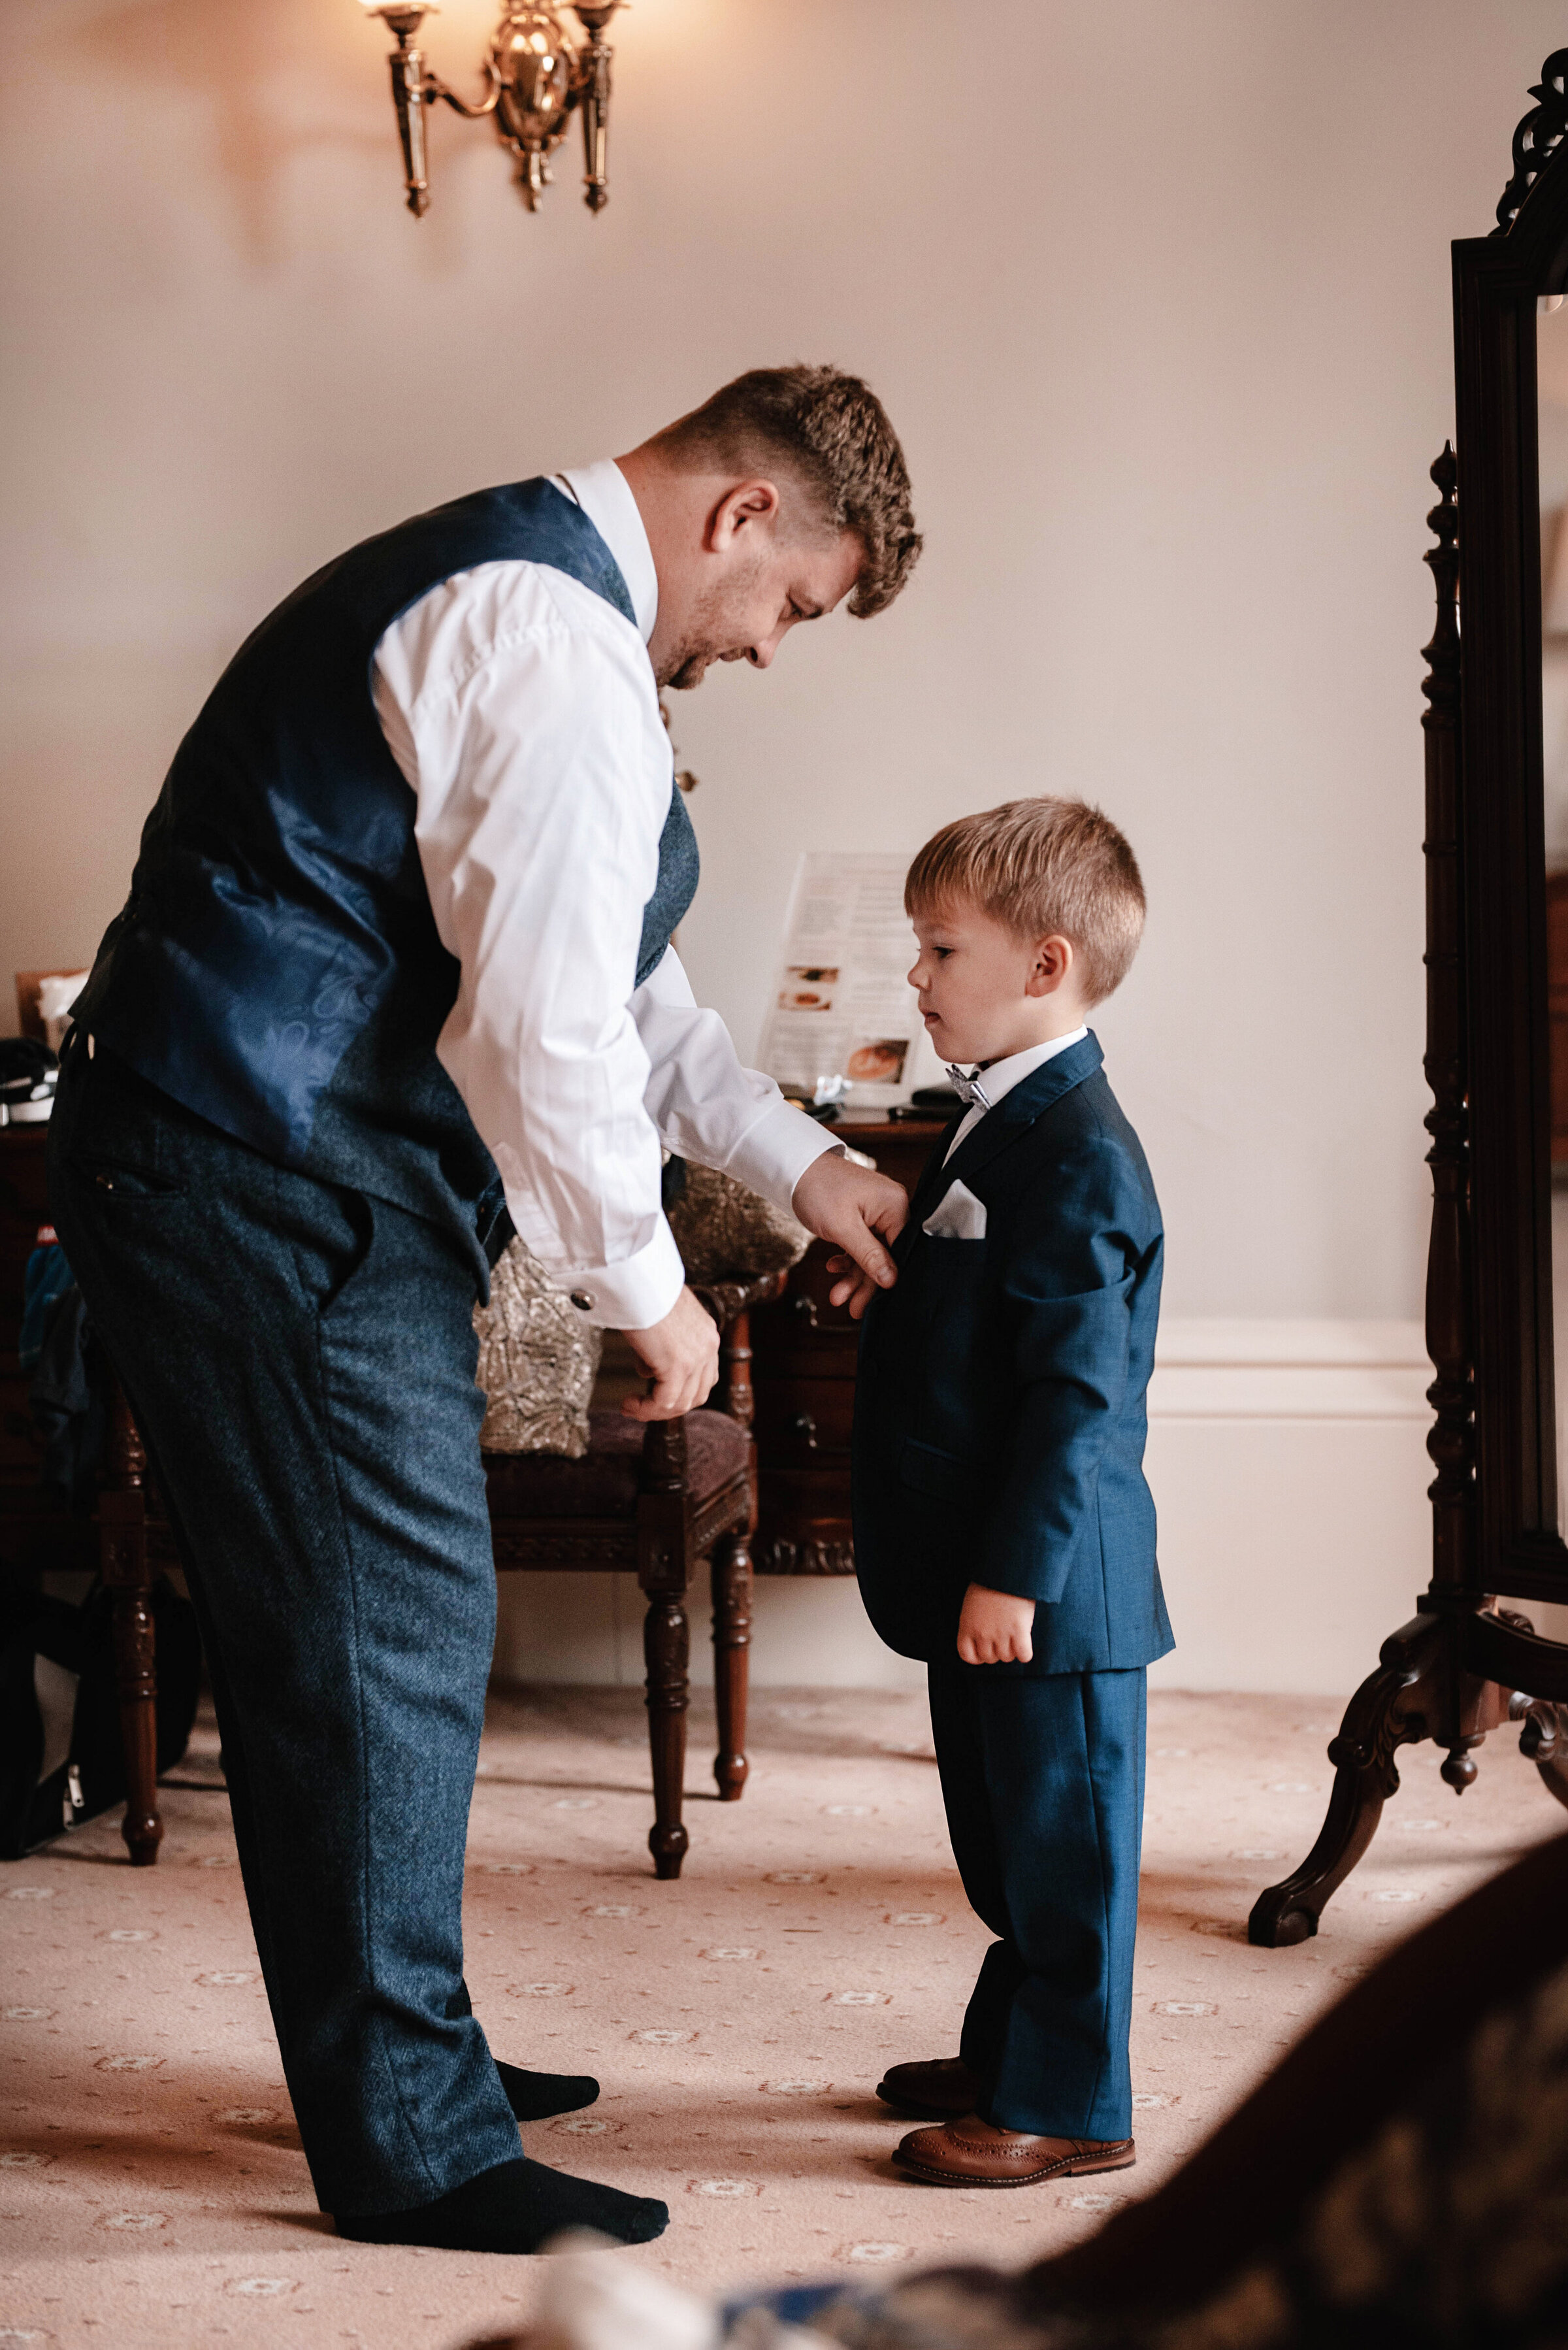 Groom dressed in wedding suit helping his son fasten his suit buttons